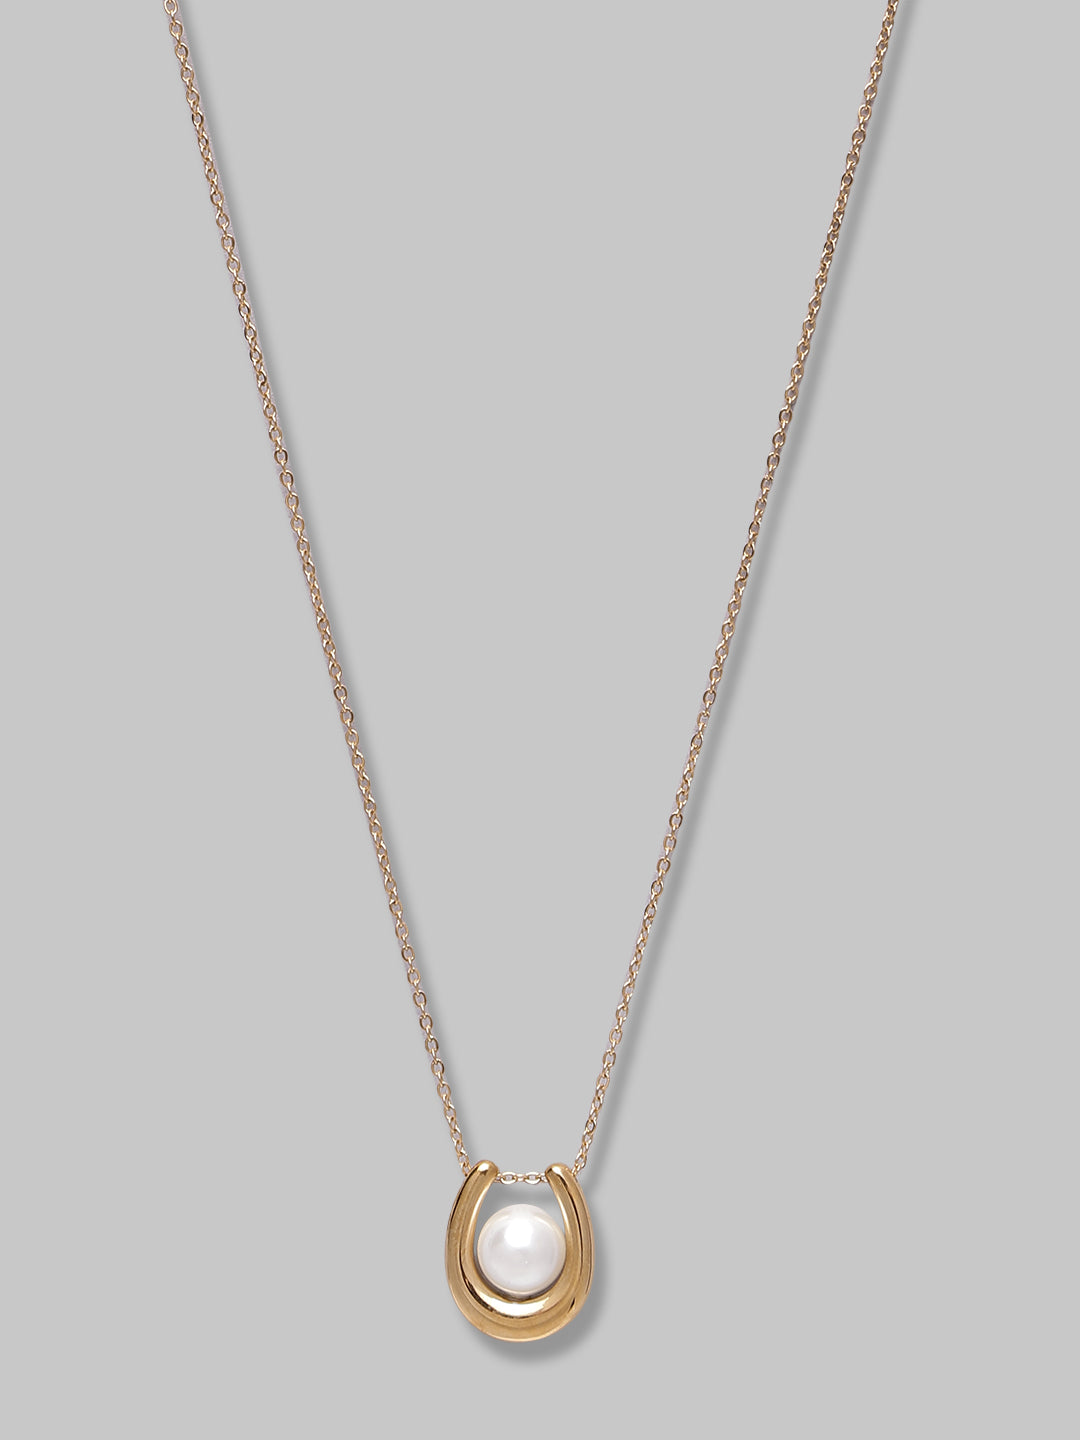 Gold Plated And Unique White Pearl Design Lightweight Chain For Women And Girls